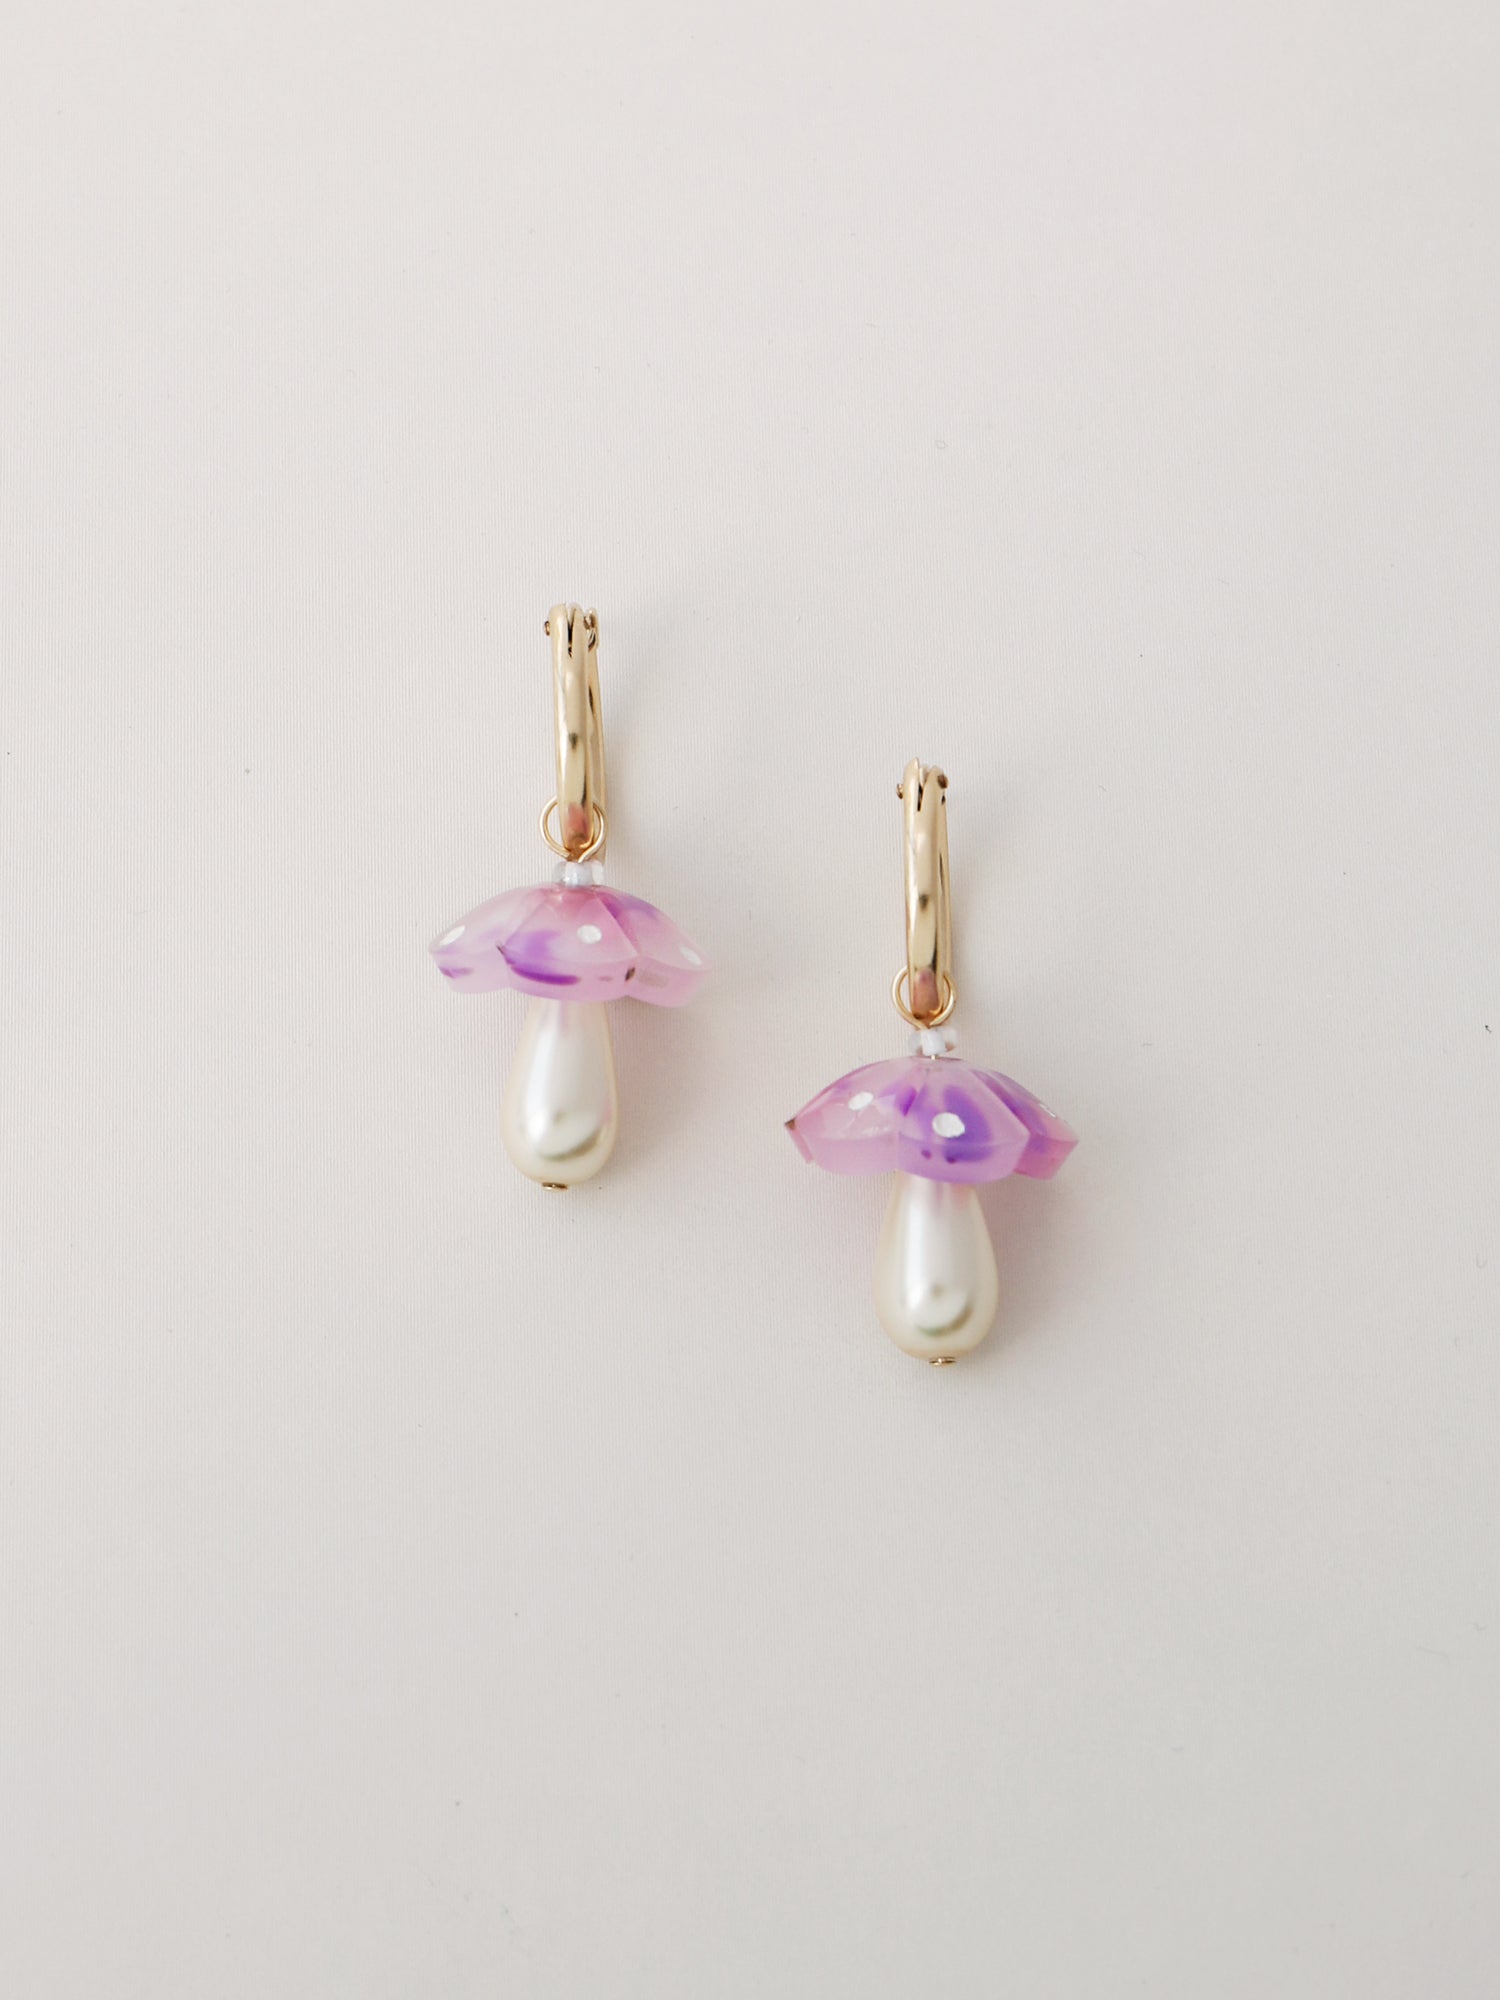 Mushroom charm hoops in lavender speckle. Made from heat-formed speckled acrylic with hand-inked details, and finished off with high quality Czech glass pearls and 14k gold-filled findings.